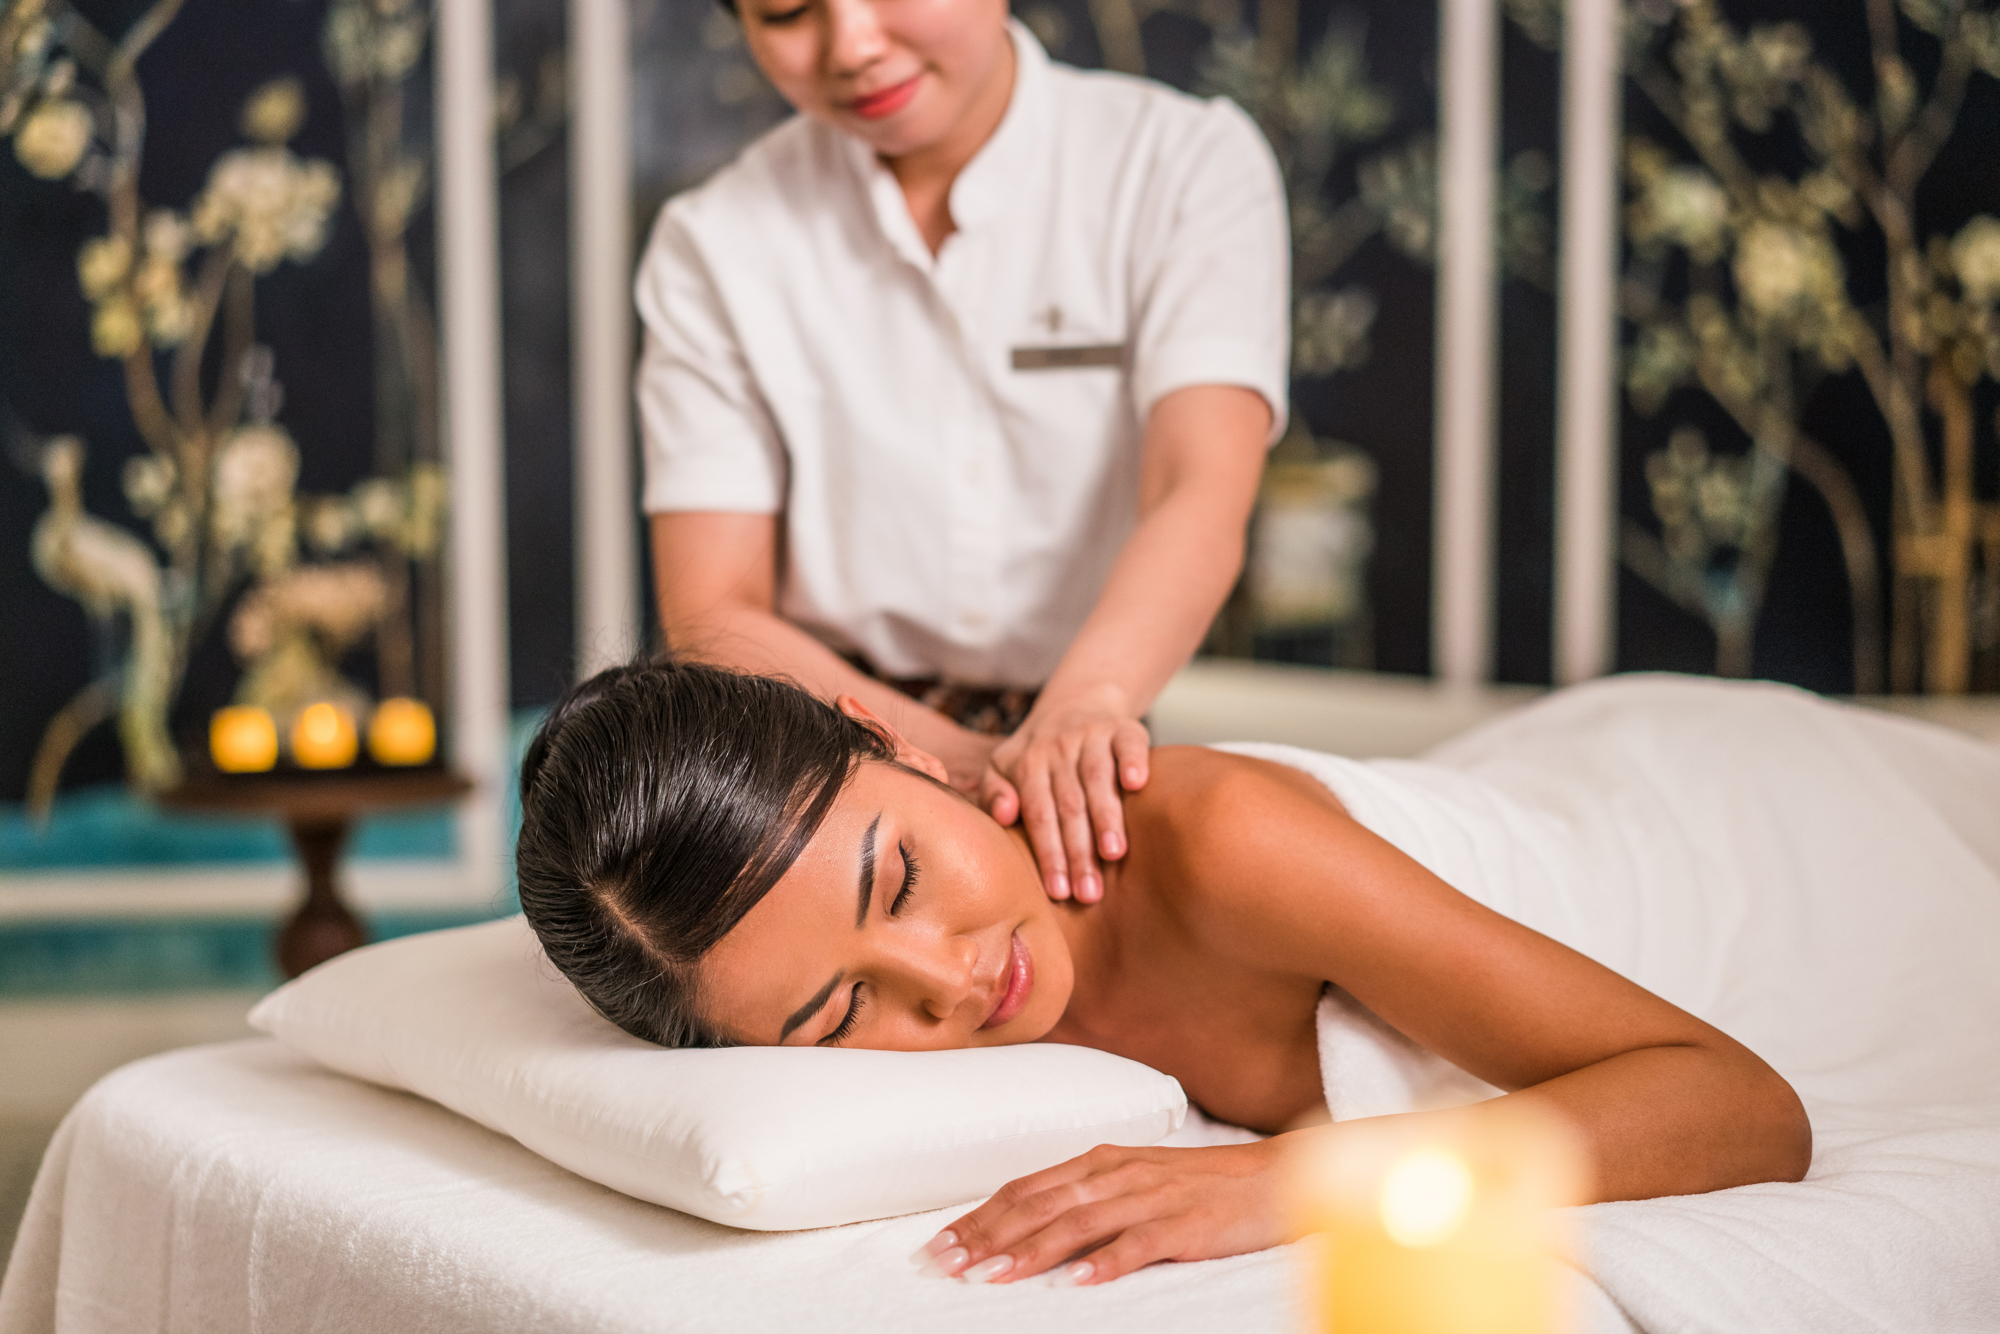 A woman gets a massage in a luxury hotel spa